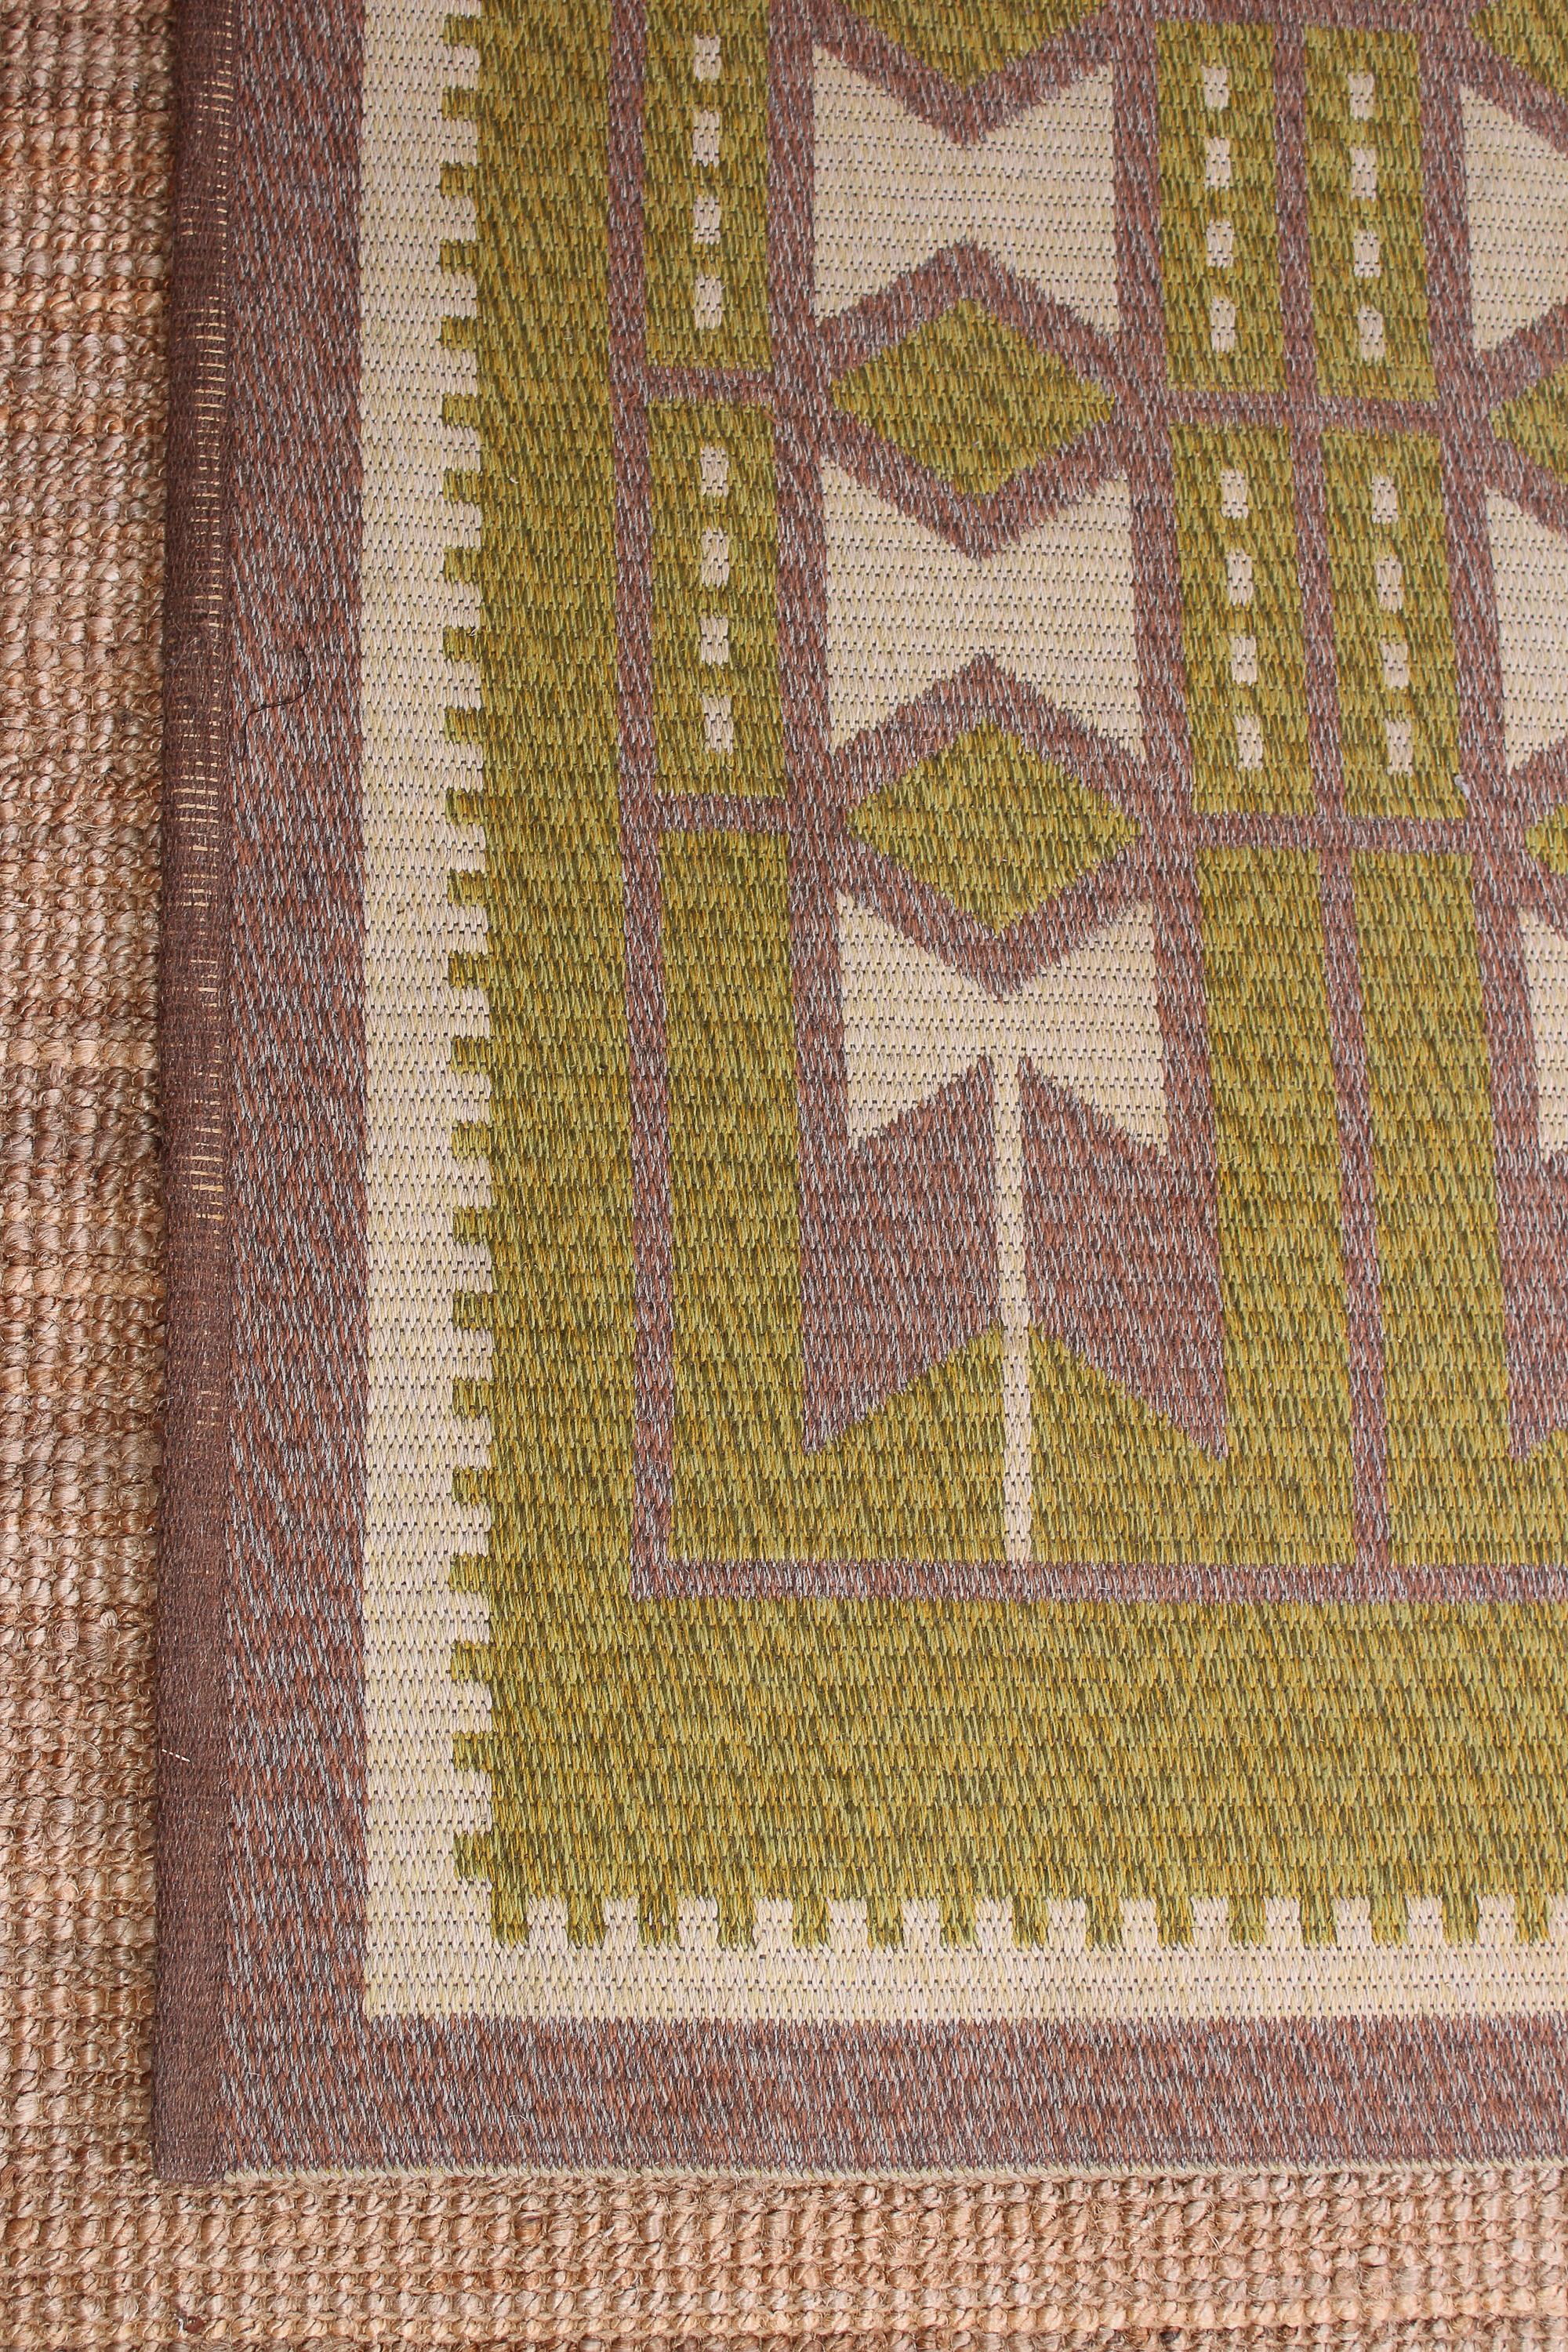 Midcentury Swedish Flat Weave Carpet (Dubble Weave), 1950s In Good Condition For Sale In Malmo, SE